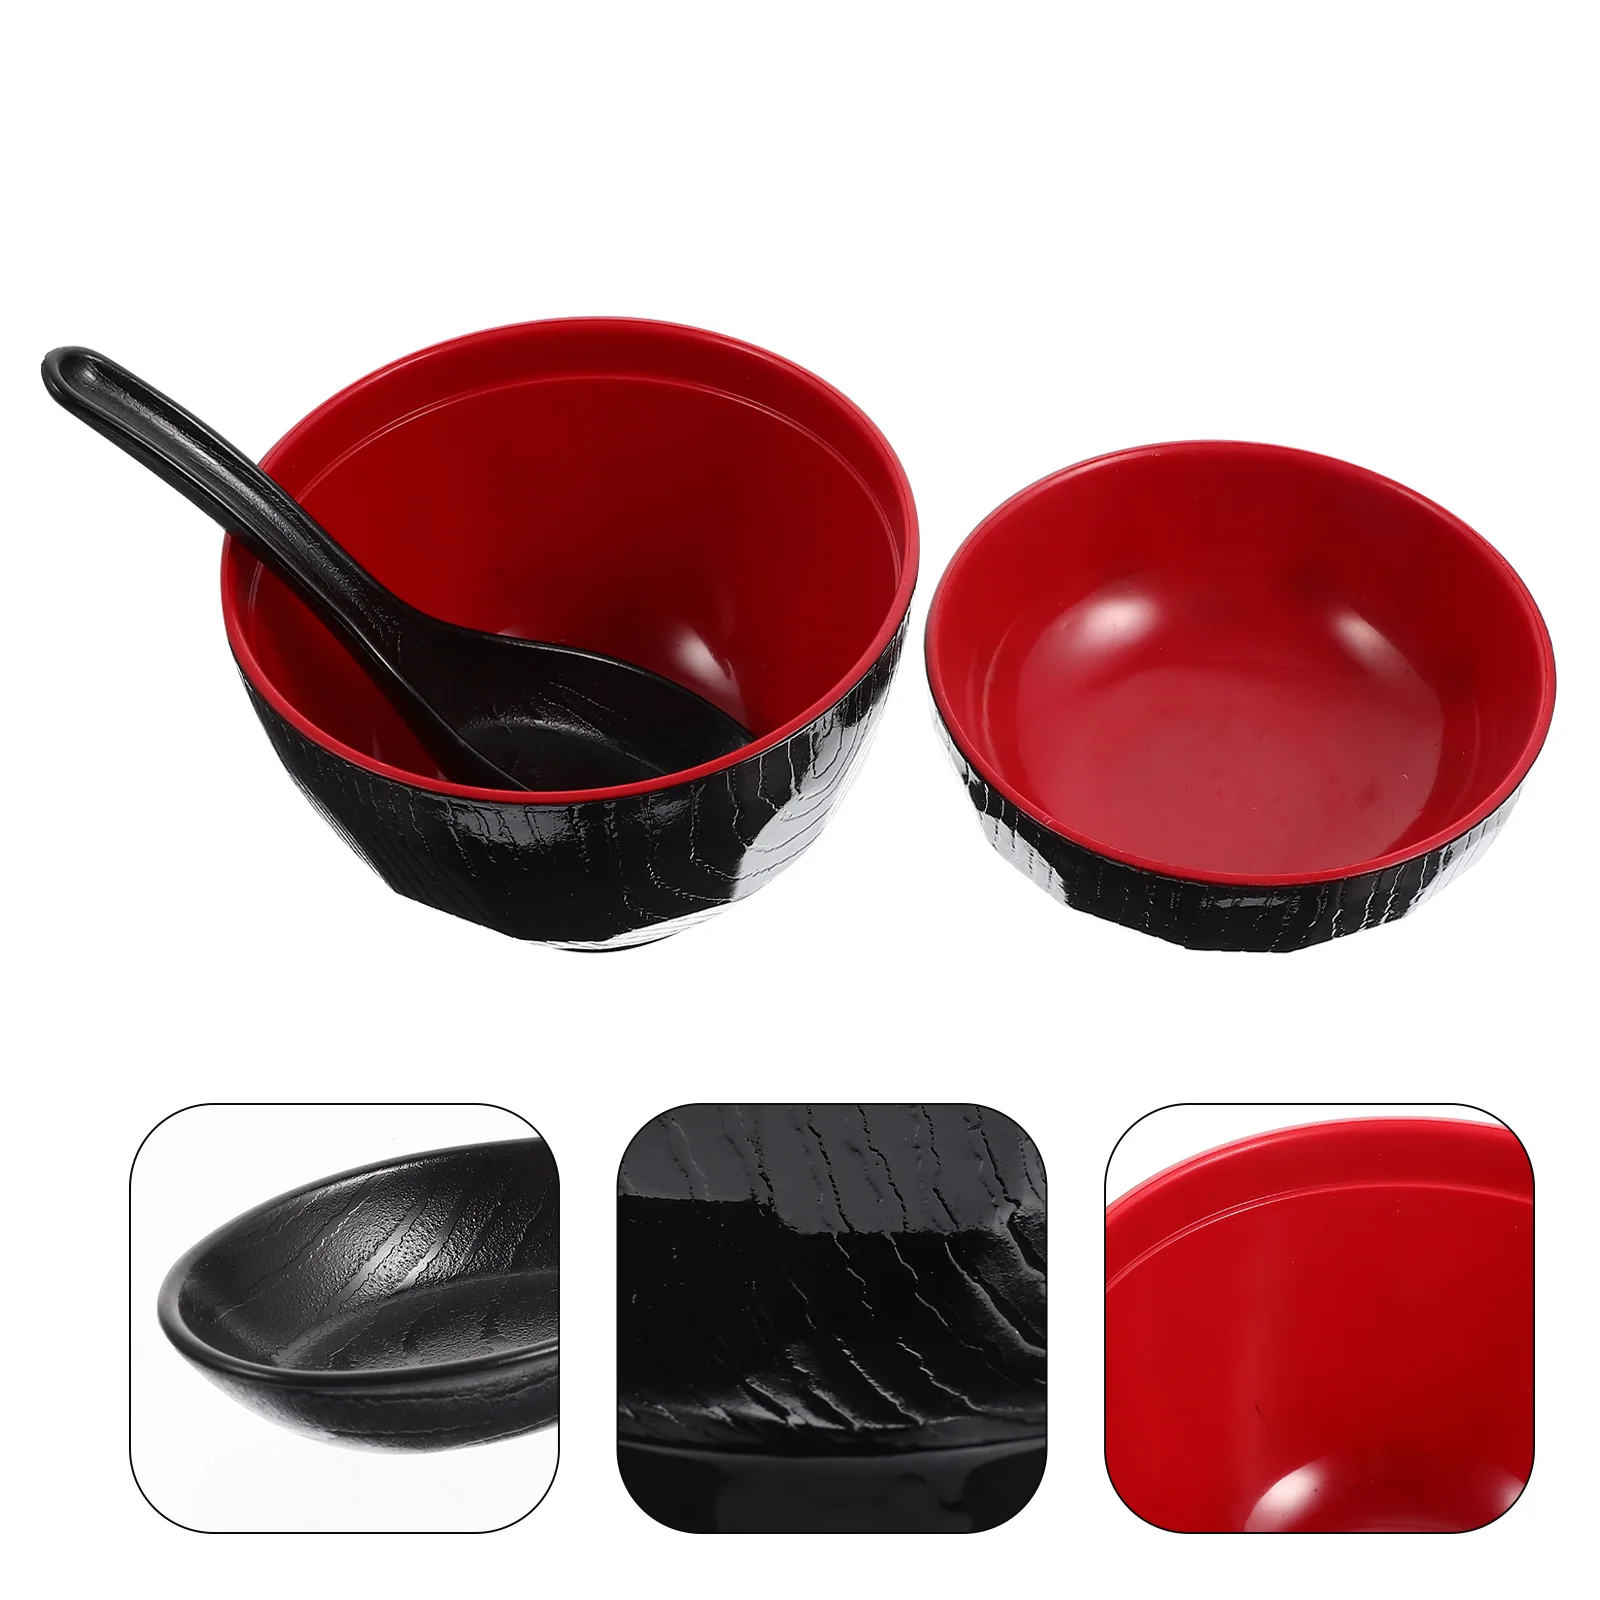 

Miso Soup Bowl Japanese Food Restaurant Container Chinese Containers Cooking Household Rice Melamine Kitchen Bowls Lid Lids